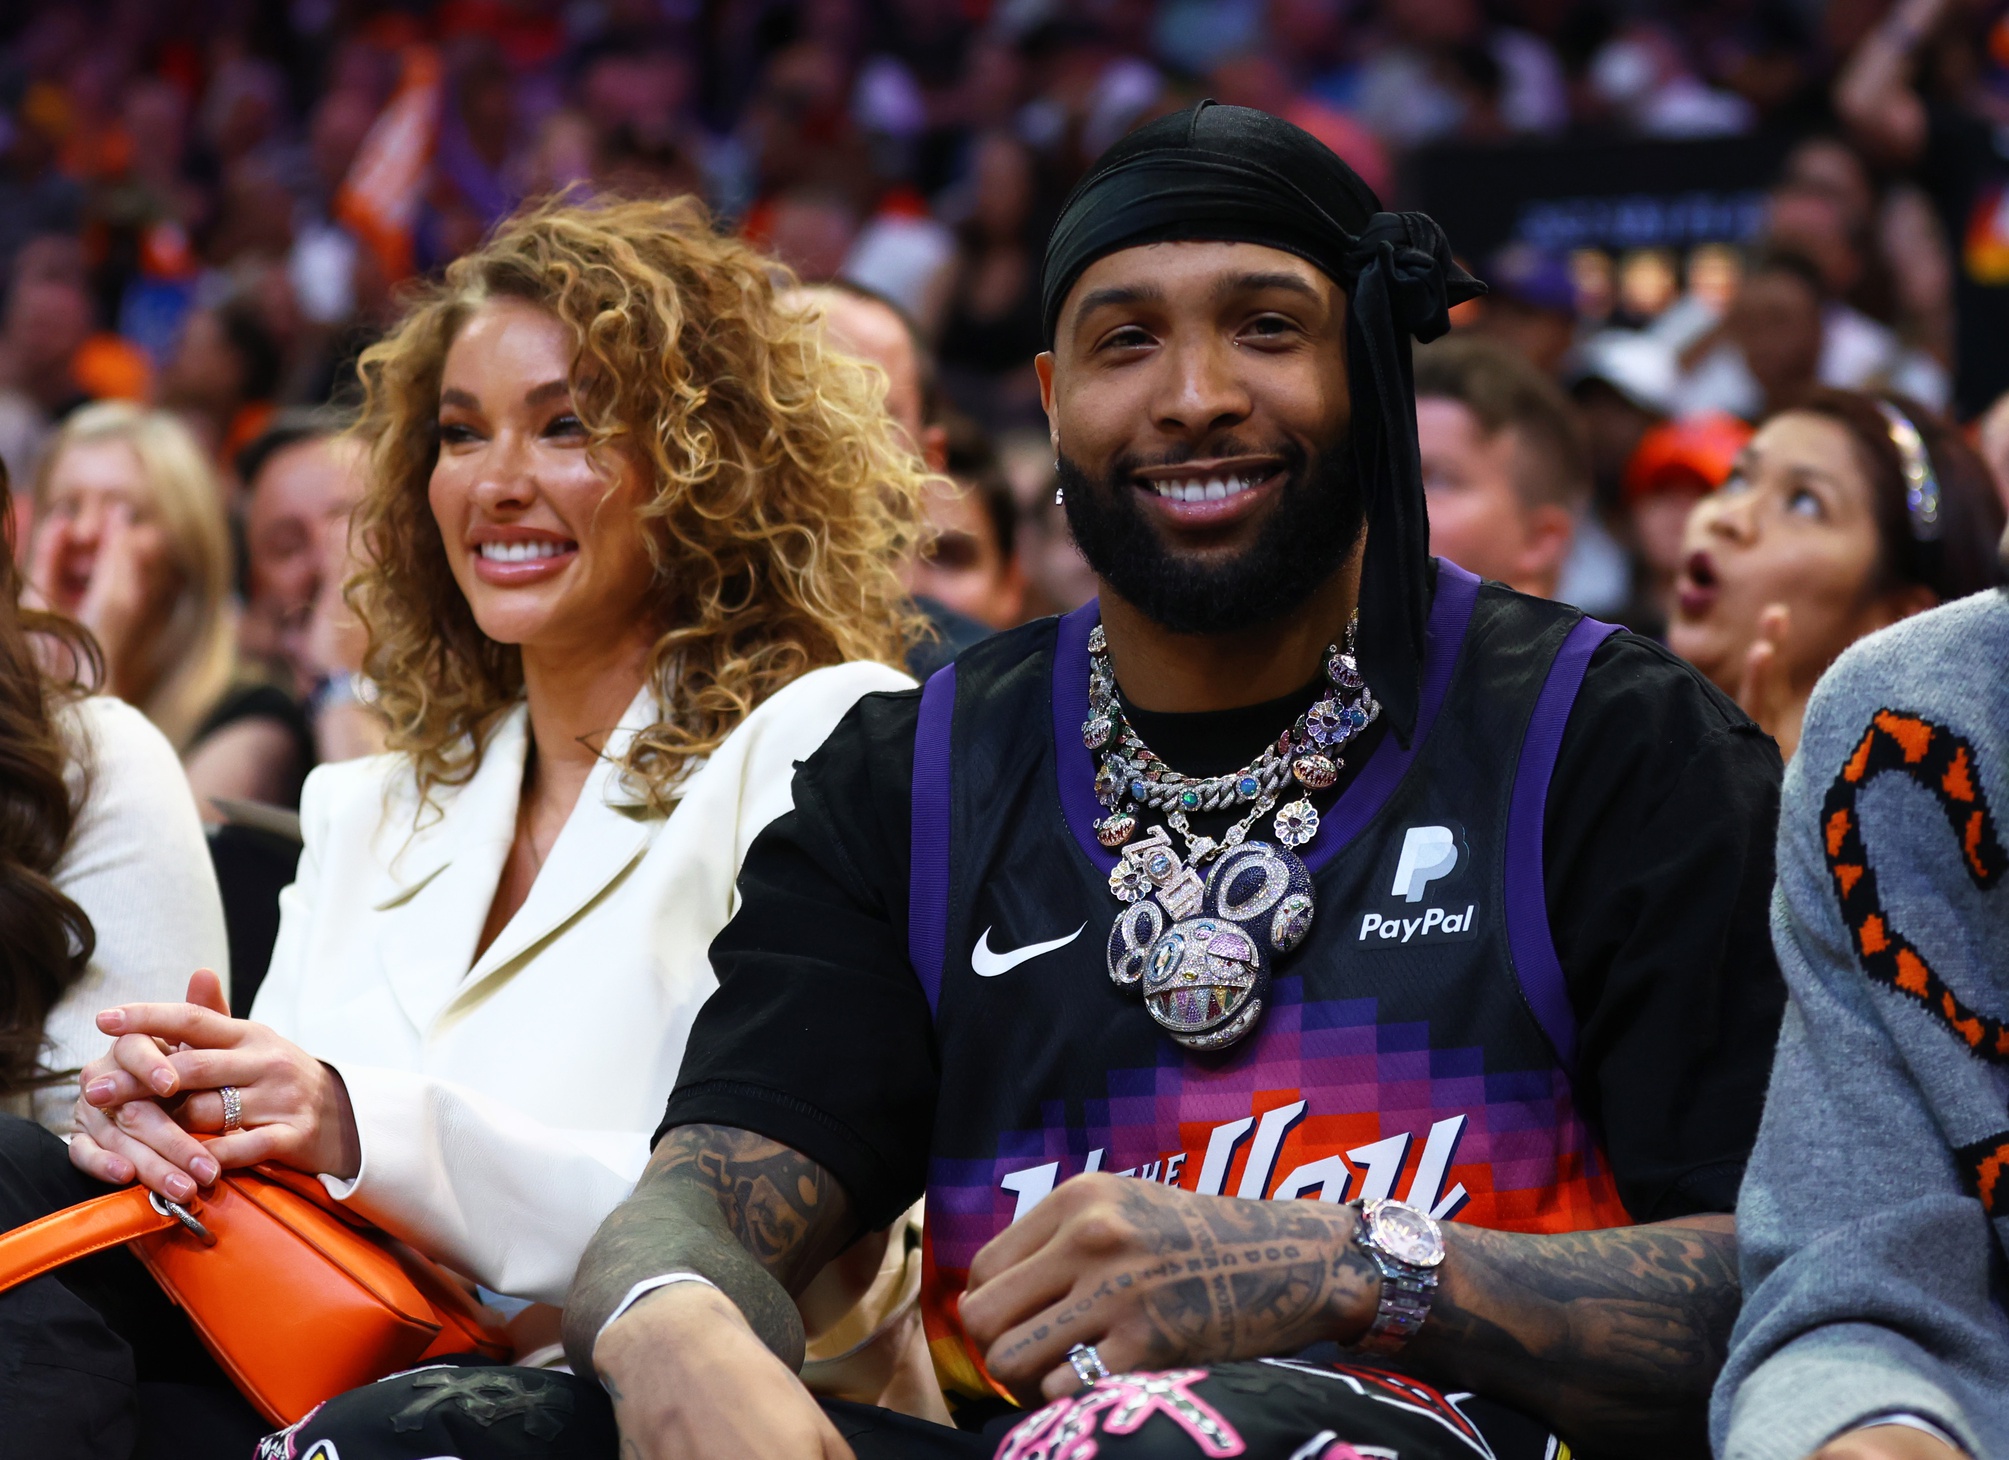 NFL Wide Receiver Odell Beckham Jr. Seen With The Miami Heat